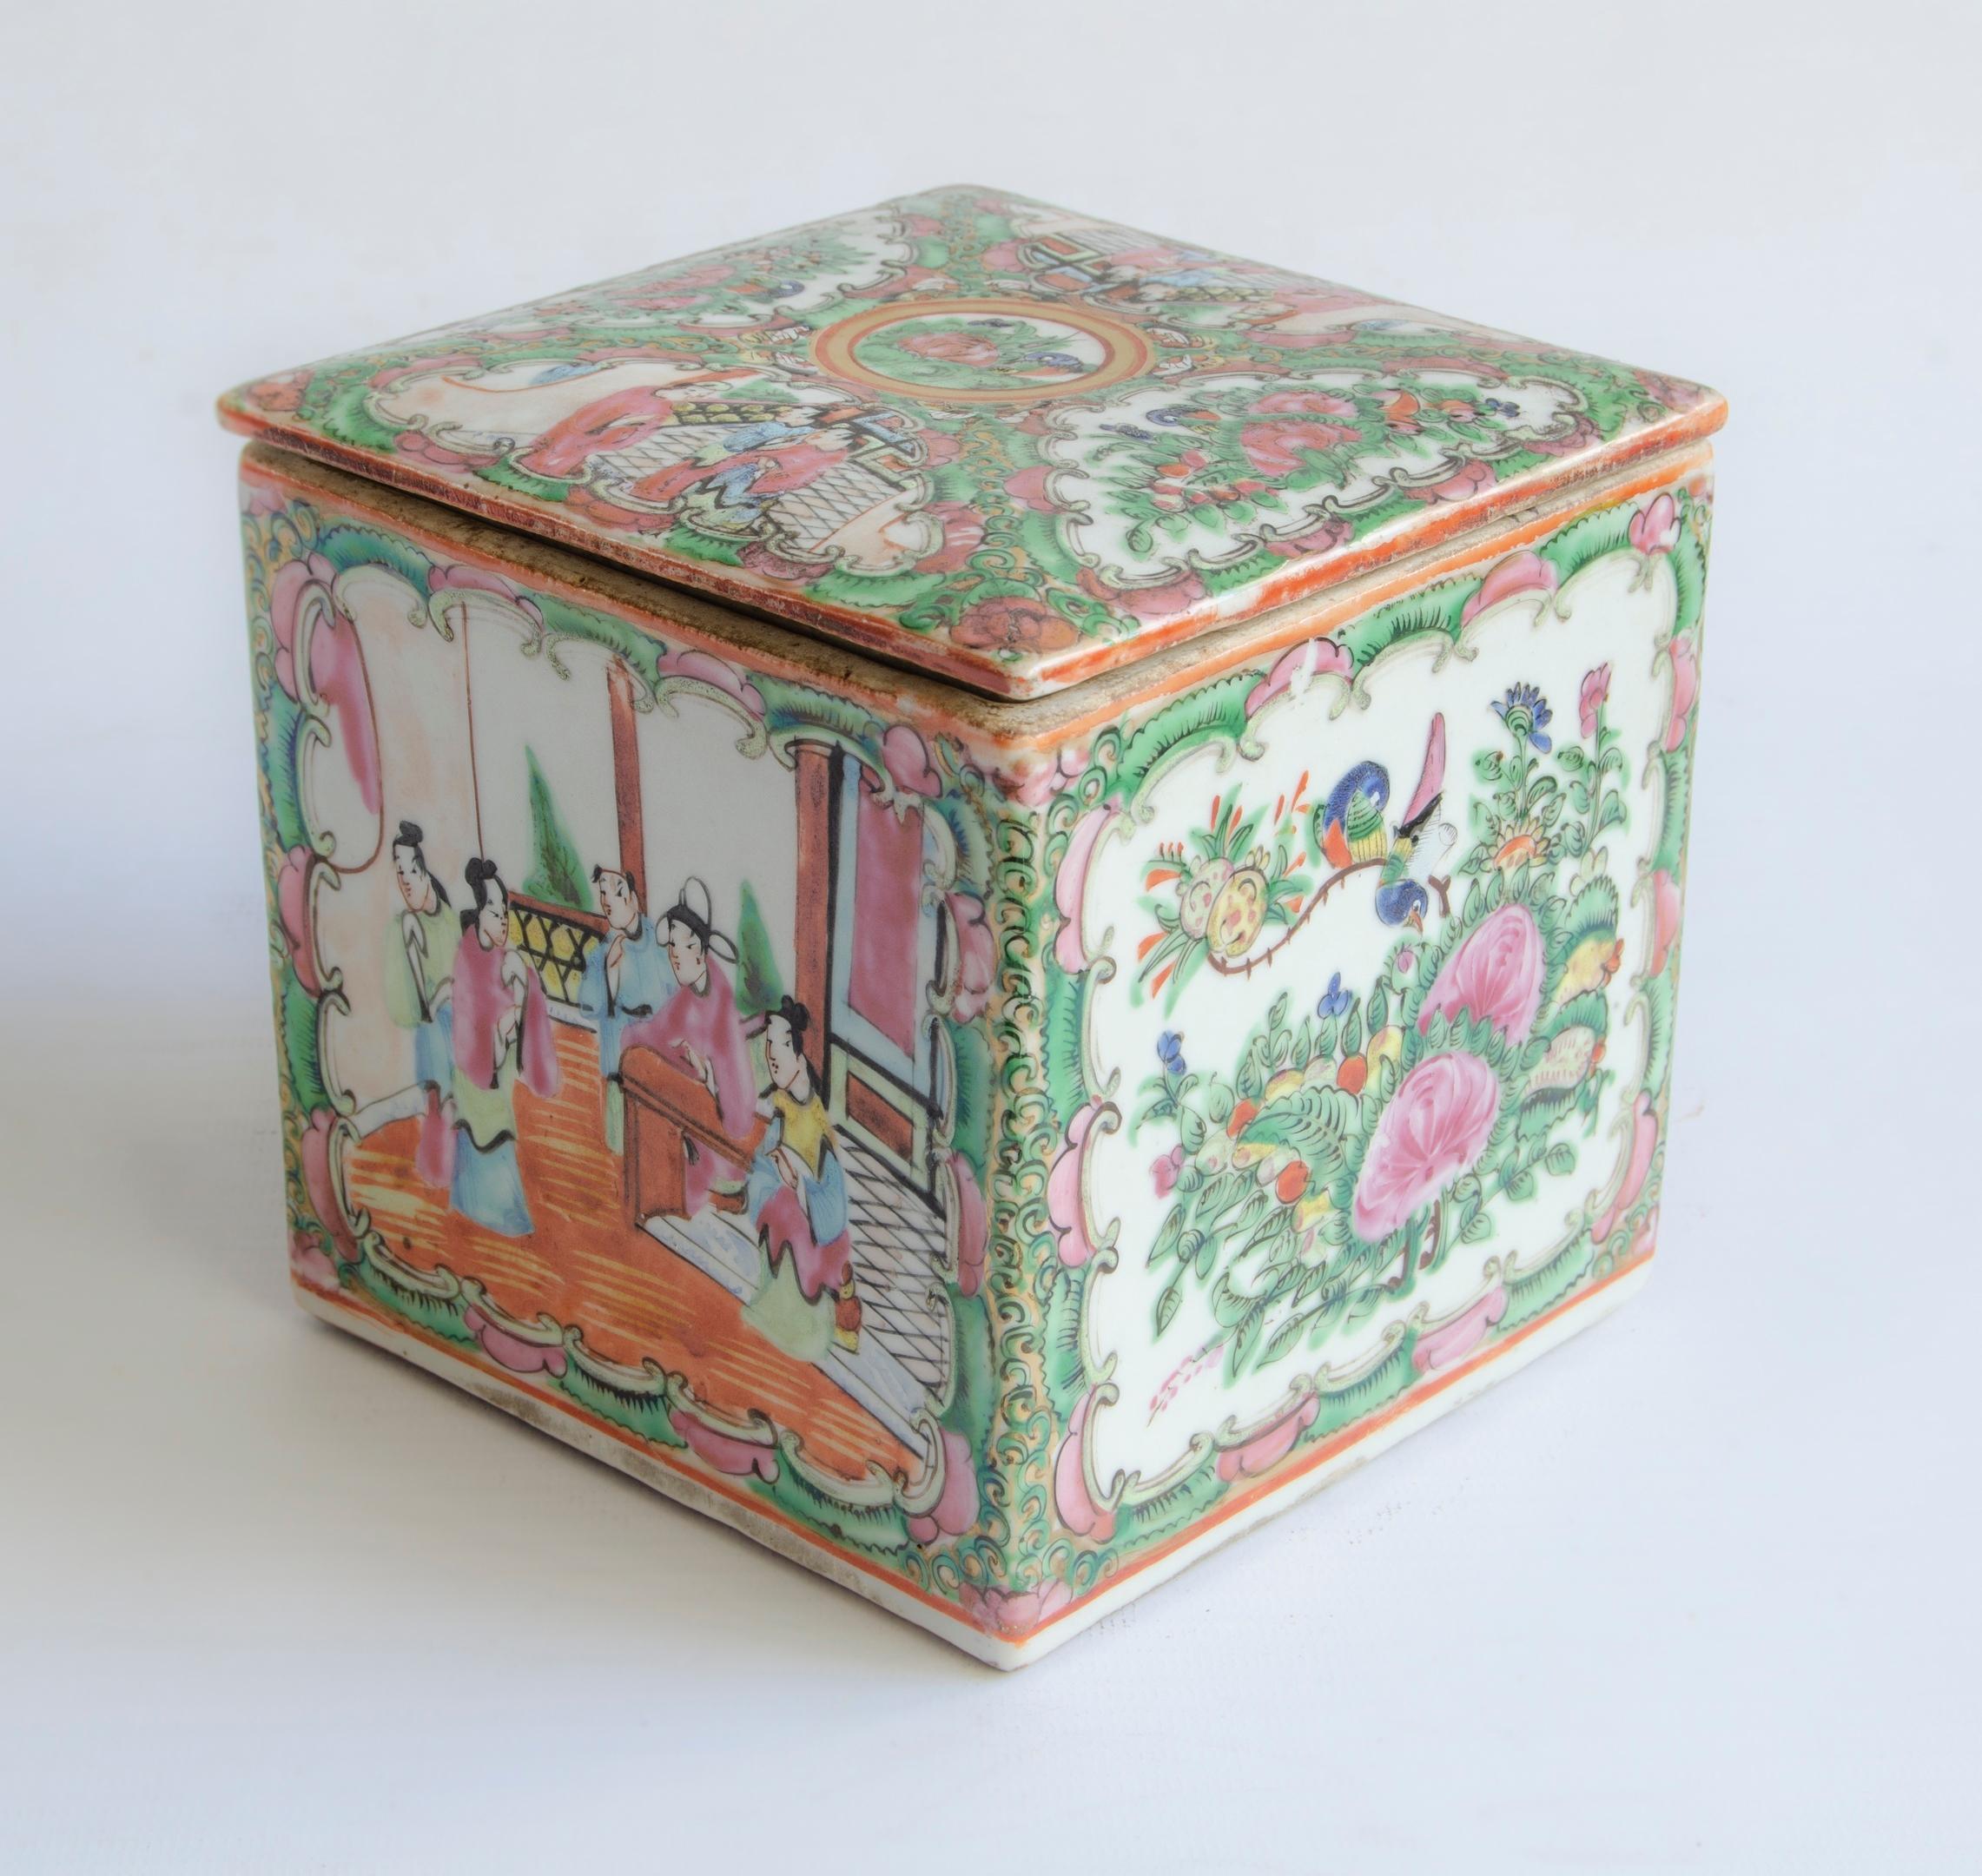 Decorative Chinese box
origin China, Canton for export
hand painted circa 1930.